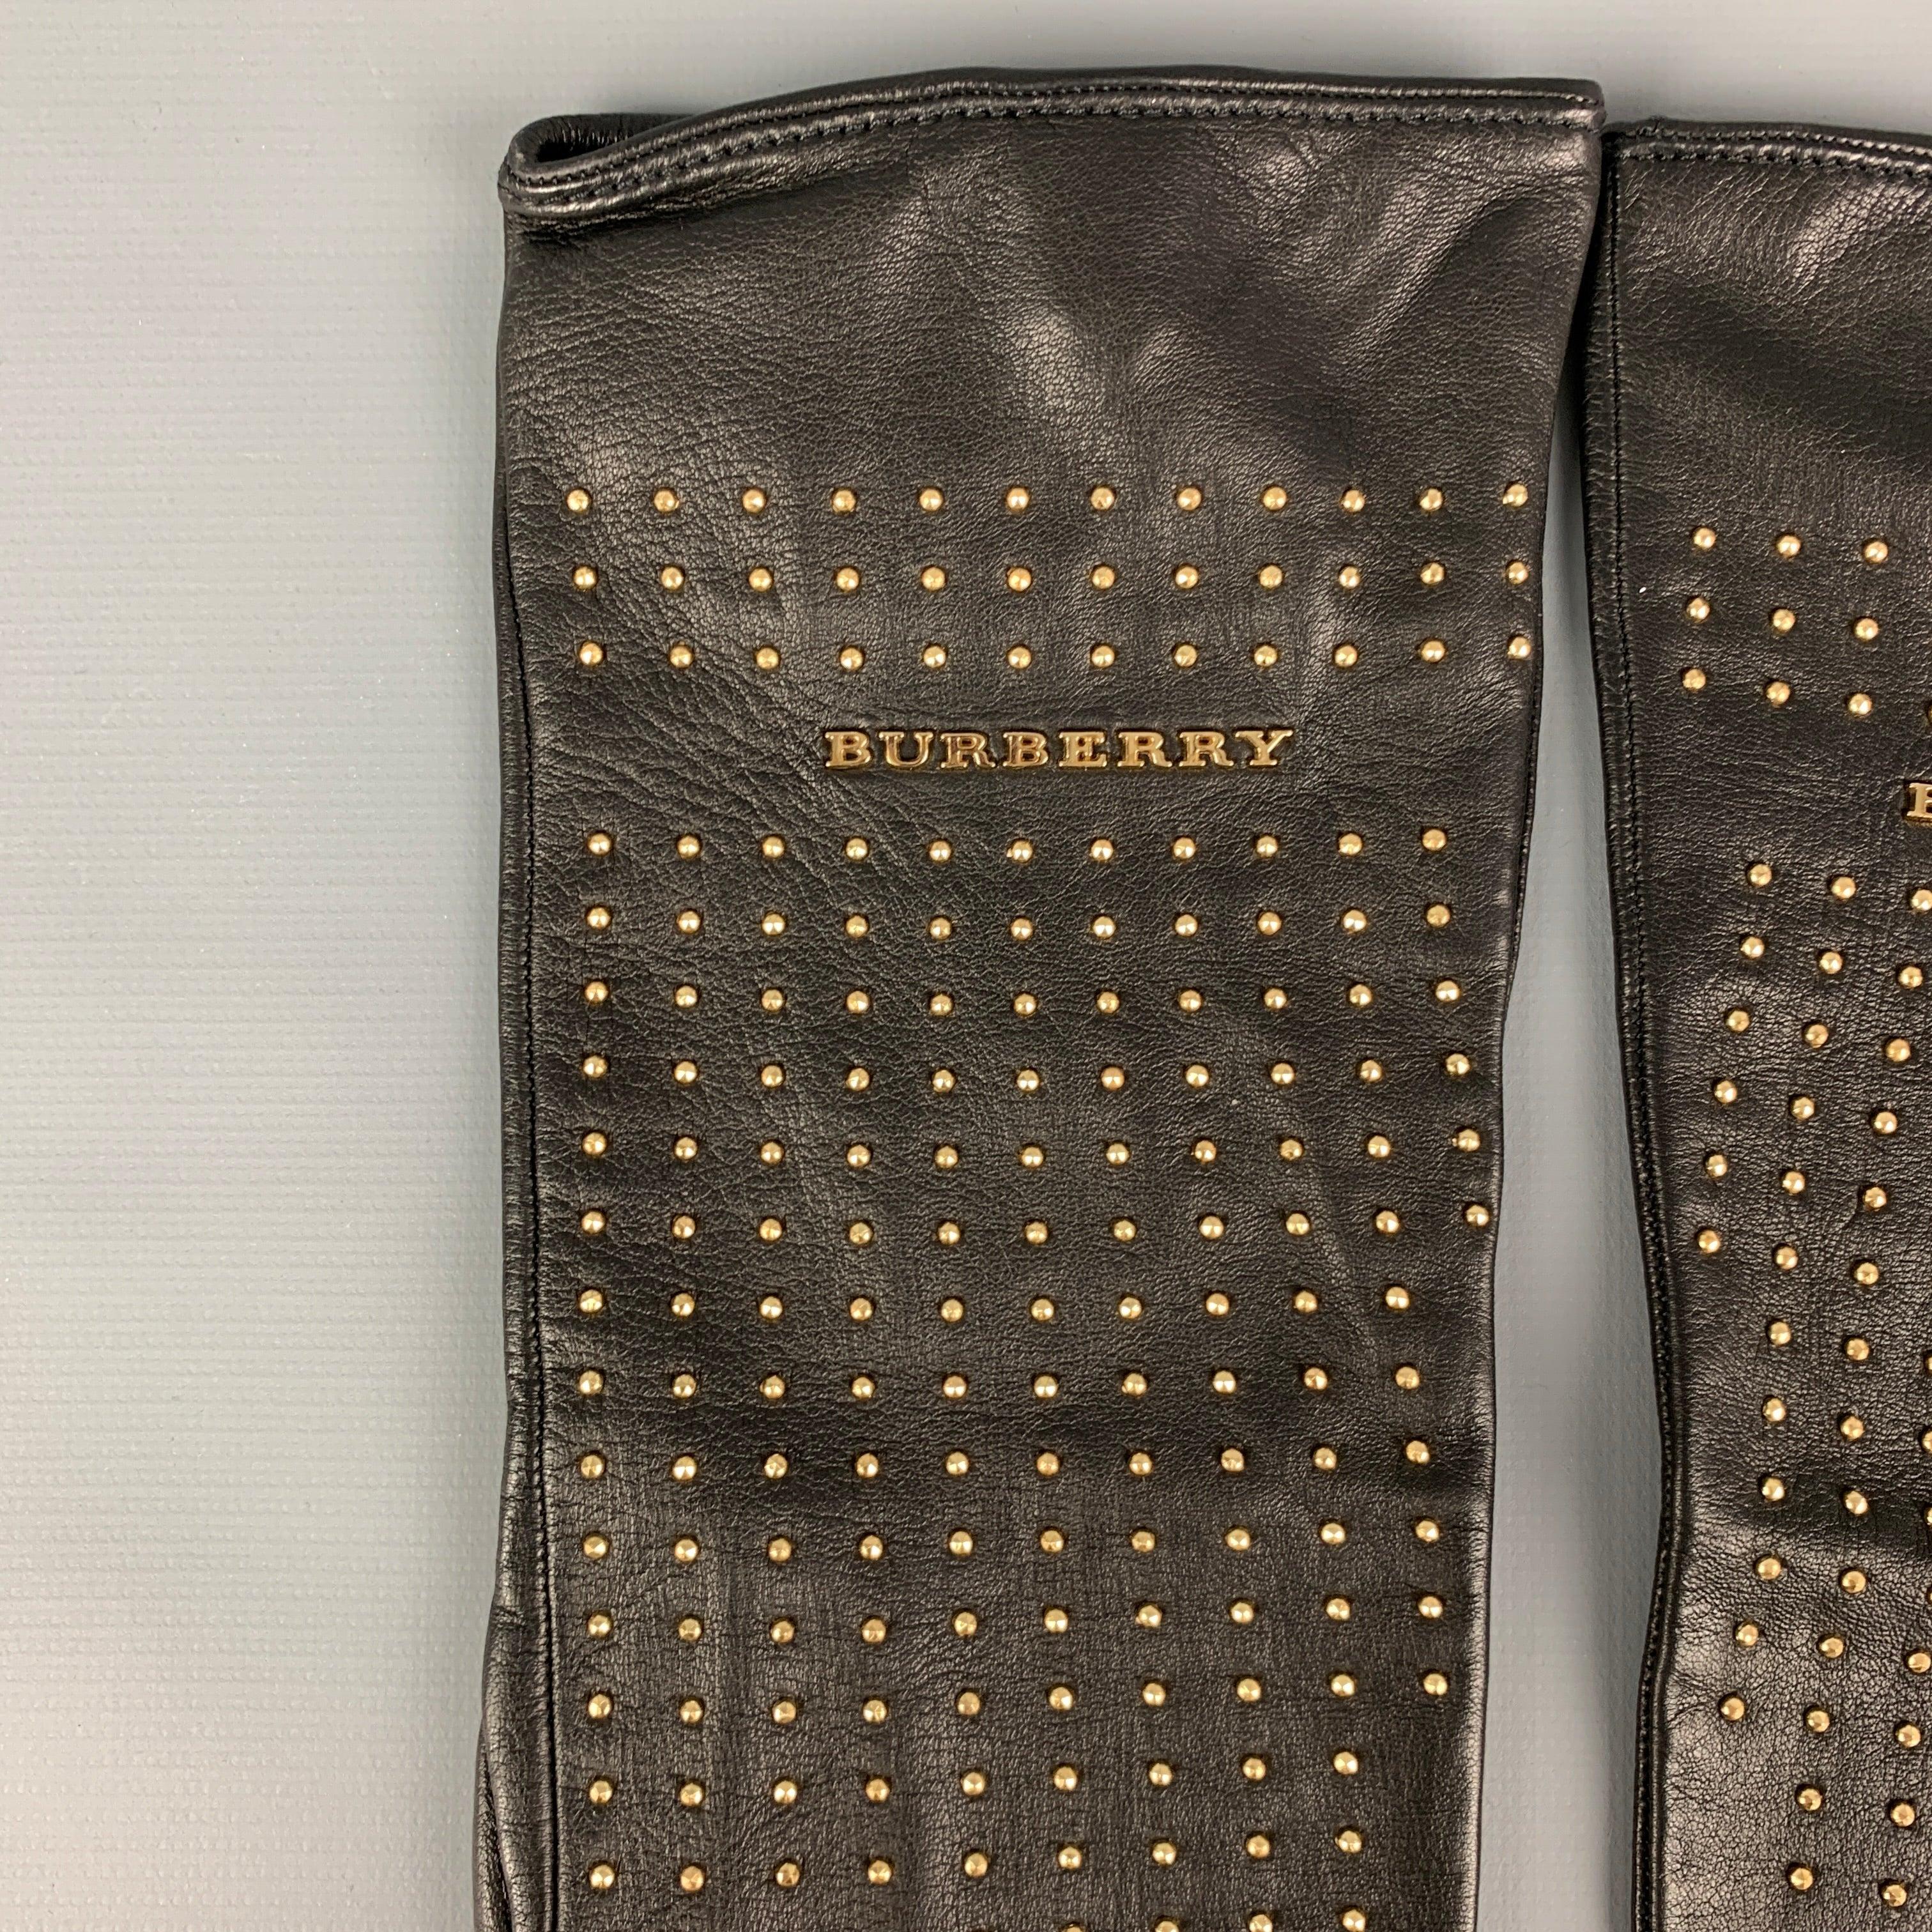 BURBERRY PRORSUM gloves comes in a black kidskin leather with a silk lining featuring gold tone studded details. Made in Italy.
New With Tags.
 

Marked:   7 

Measurements: 
  Width: 4 inches  Length: 12 inches  
  
  
 
Reference: 115108
Category: